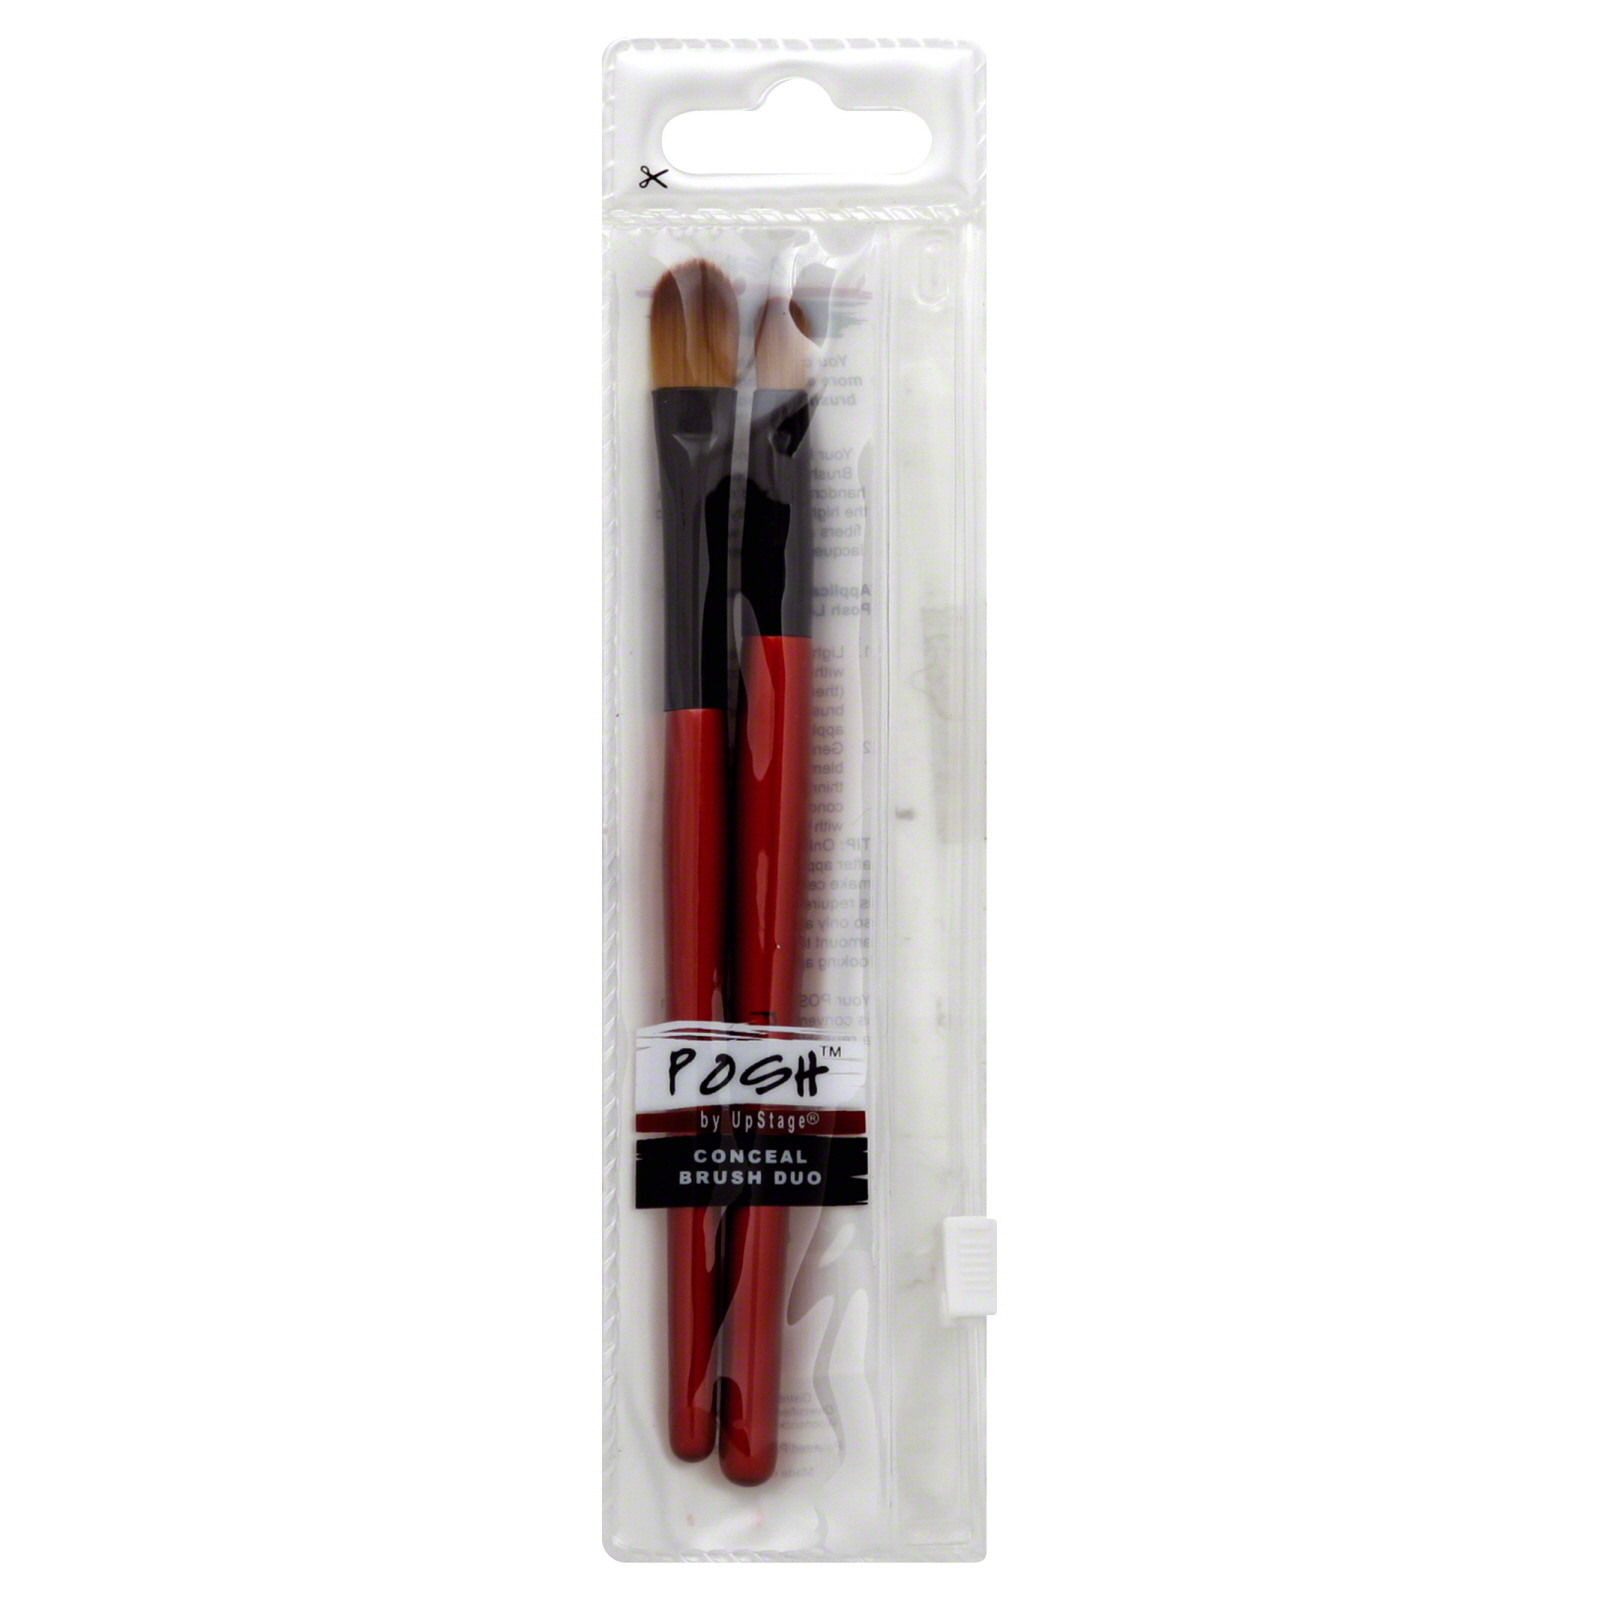 Posh Upstage  Conceal Brush Duo, 1 duo